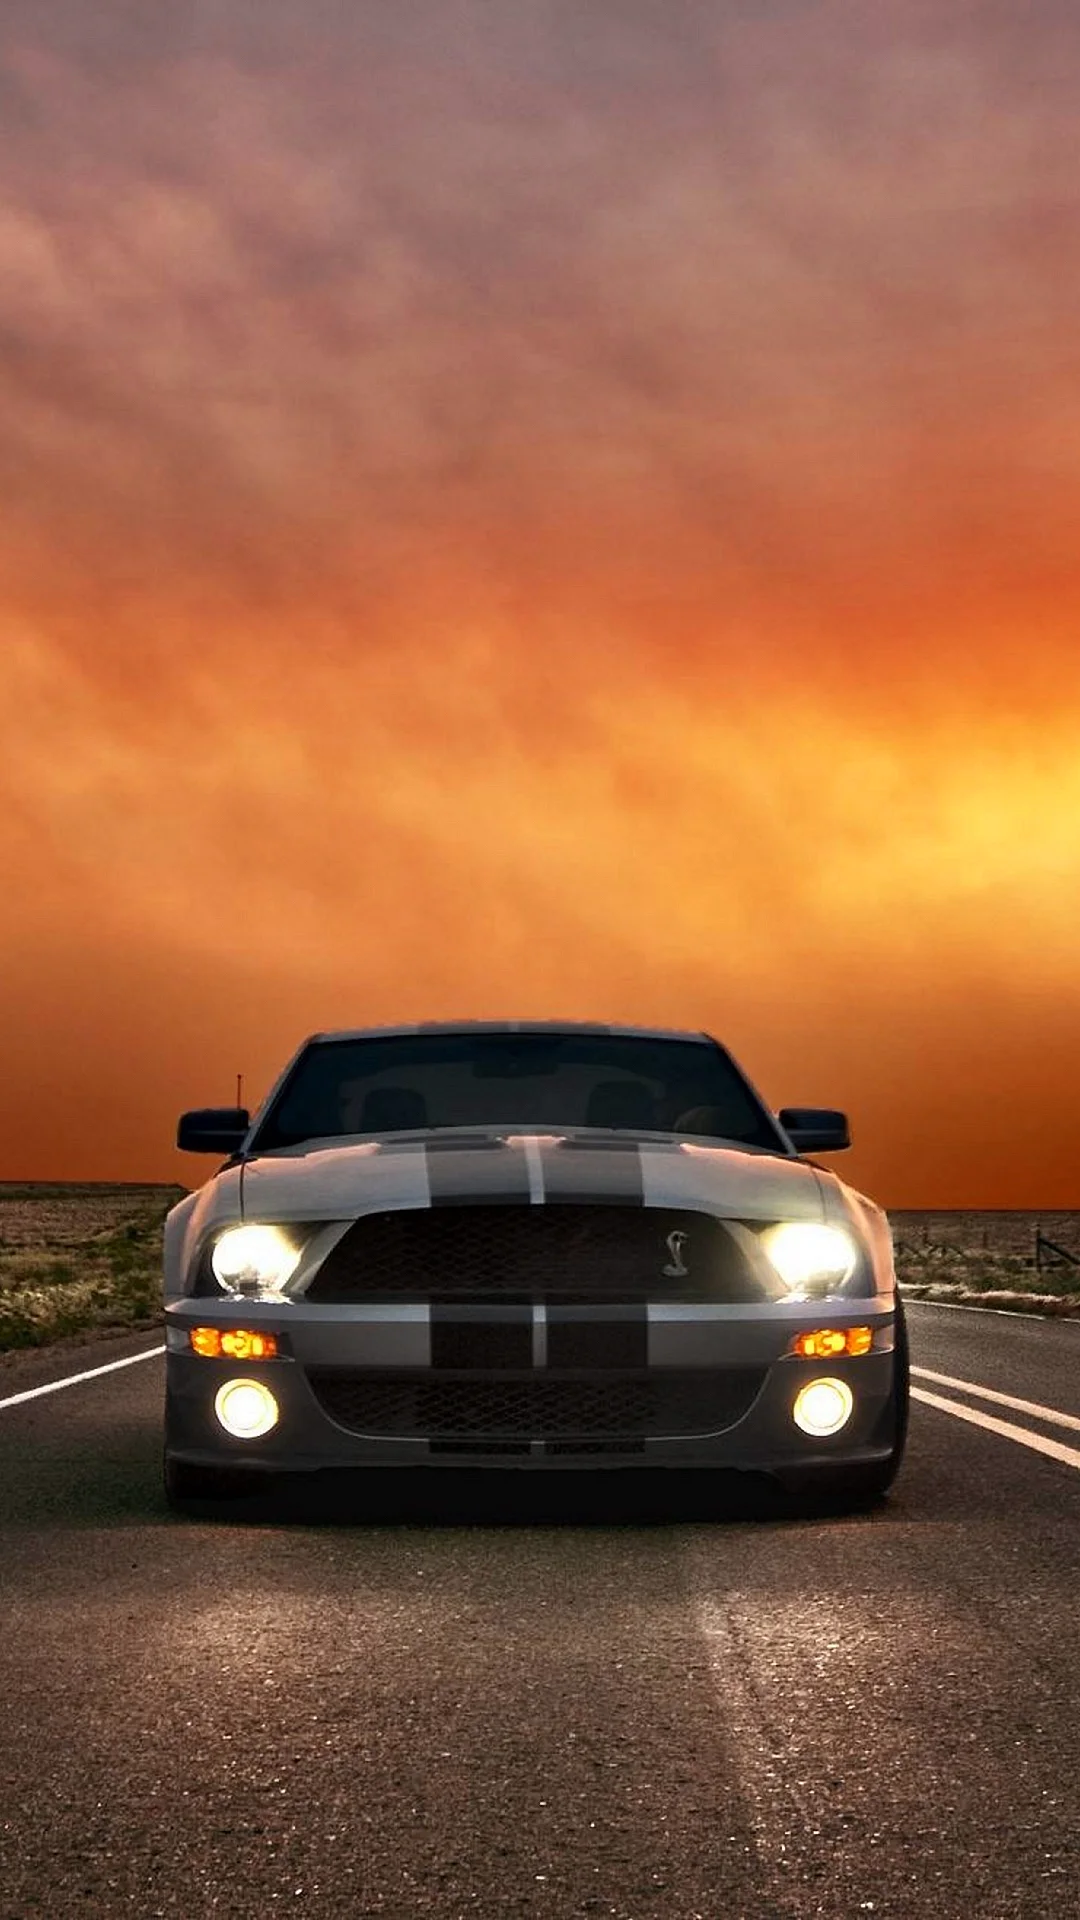 Ford Mustang iPhone Wallpaper For iPhone